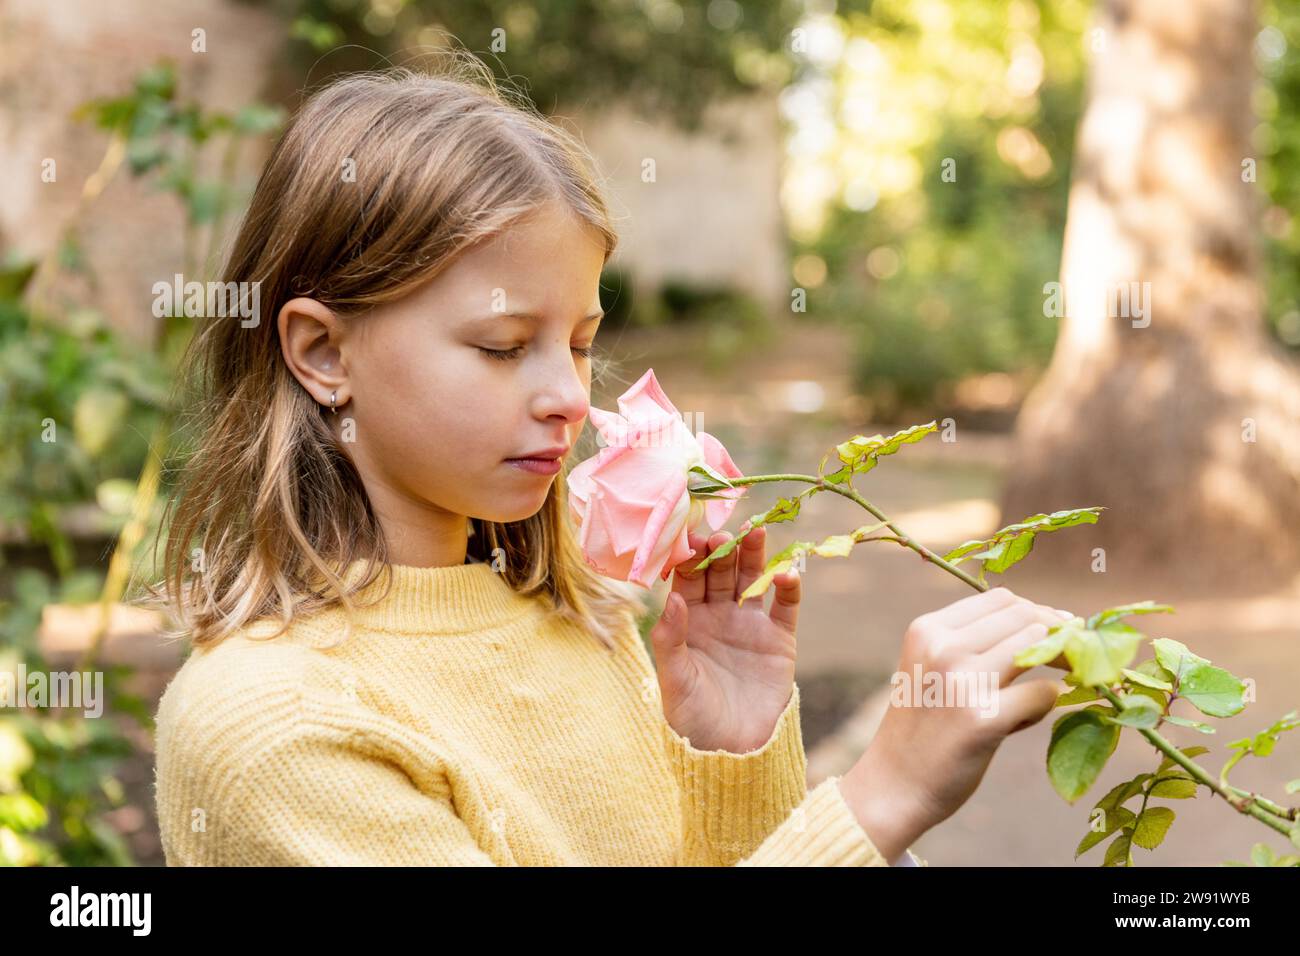 Girl with eyes closed smelling pink rose flower in park Stock Photo